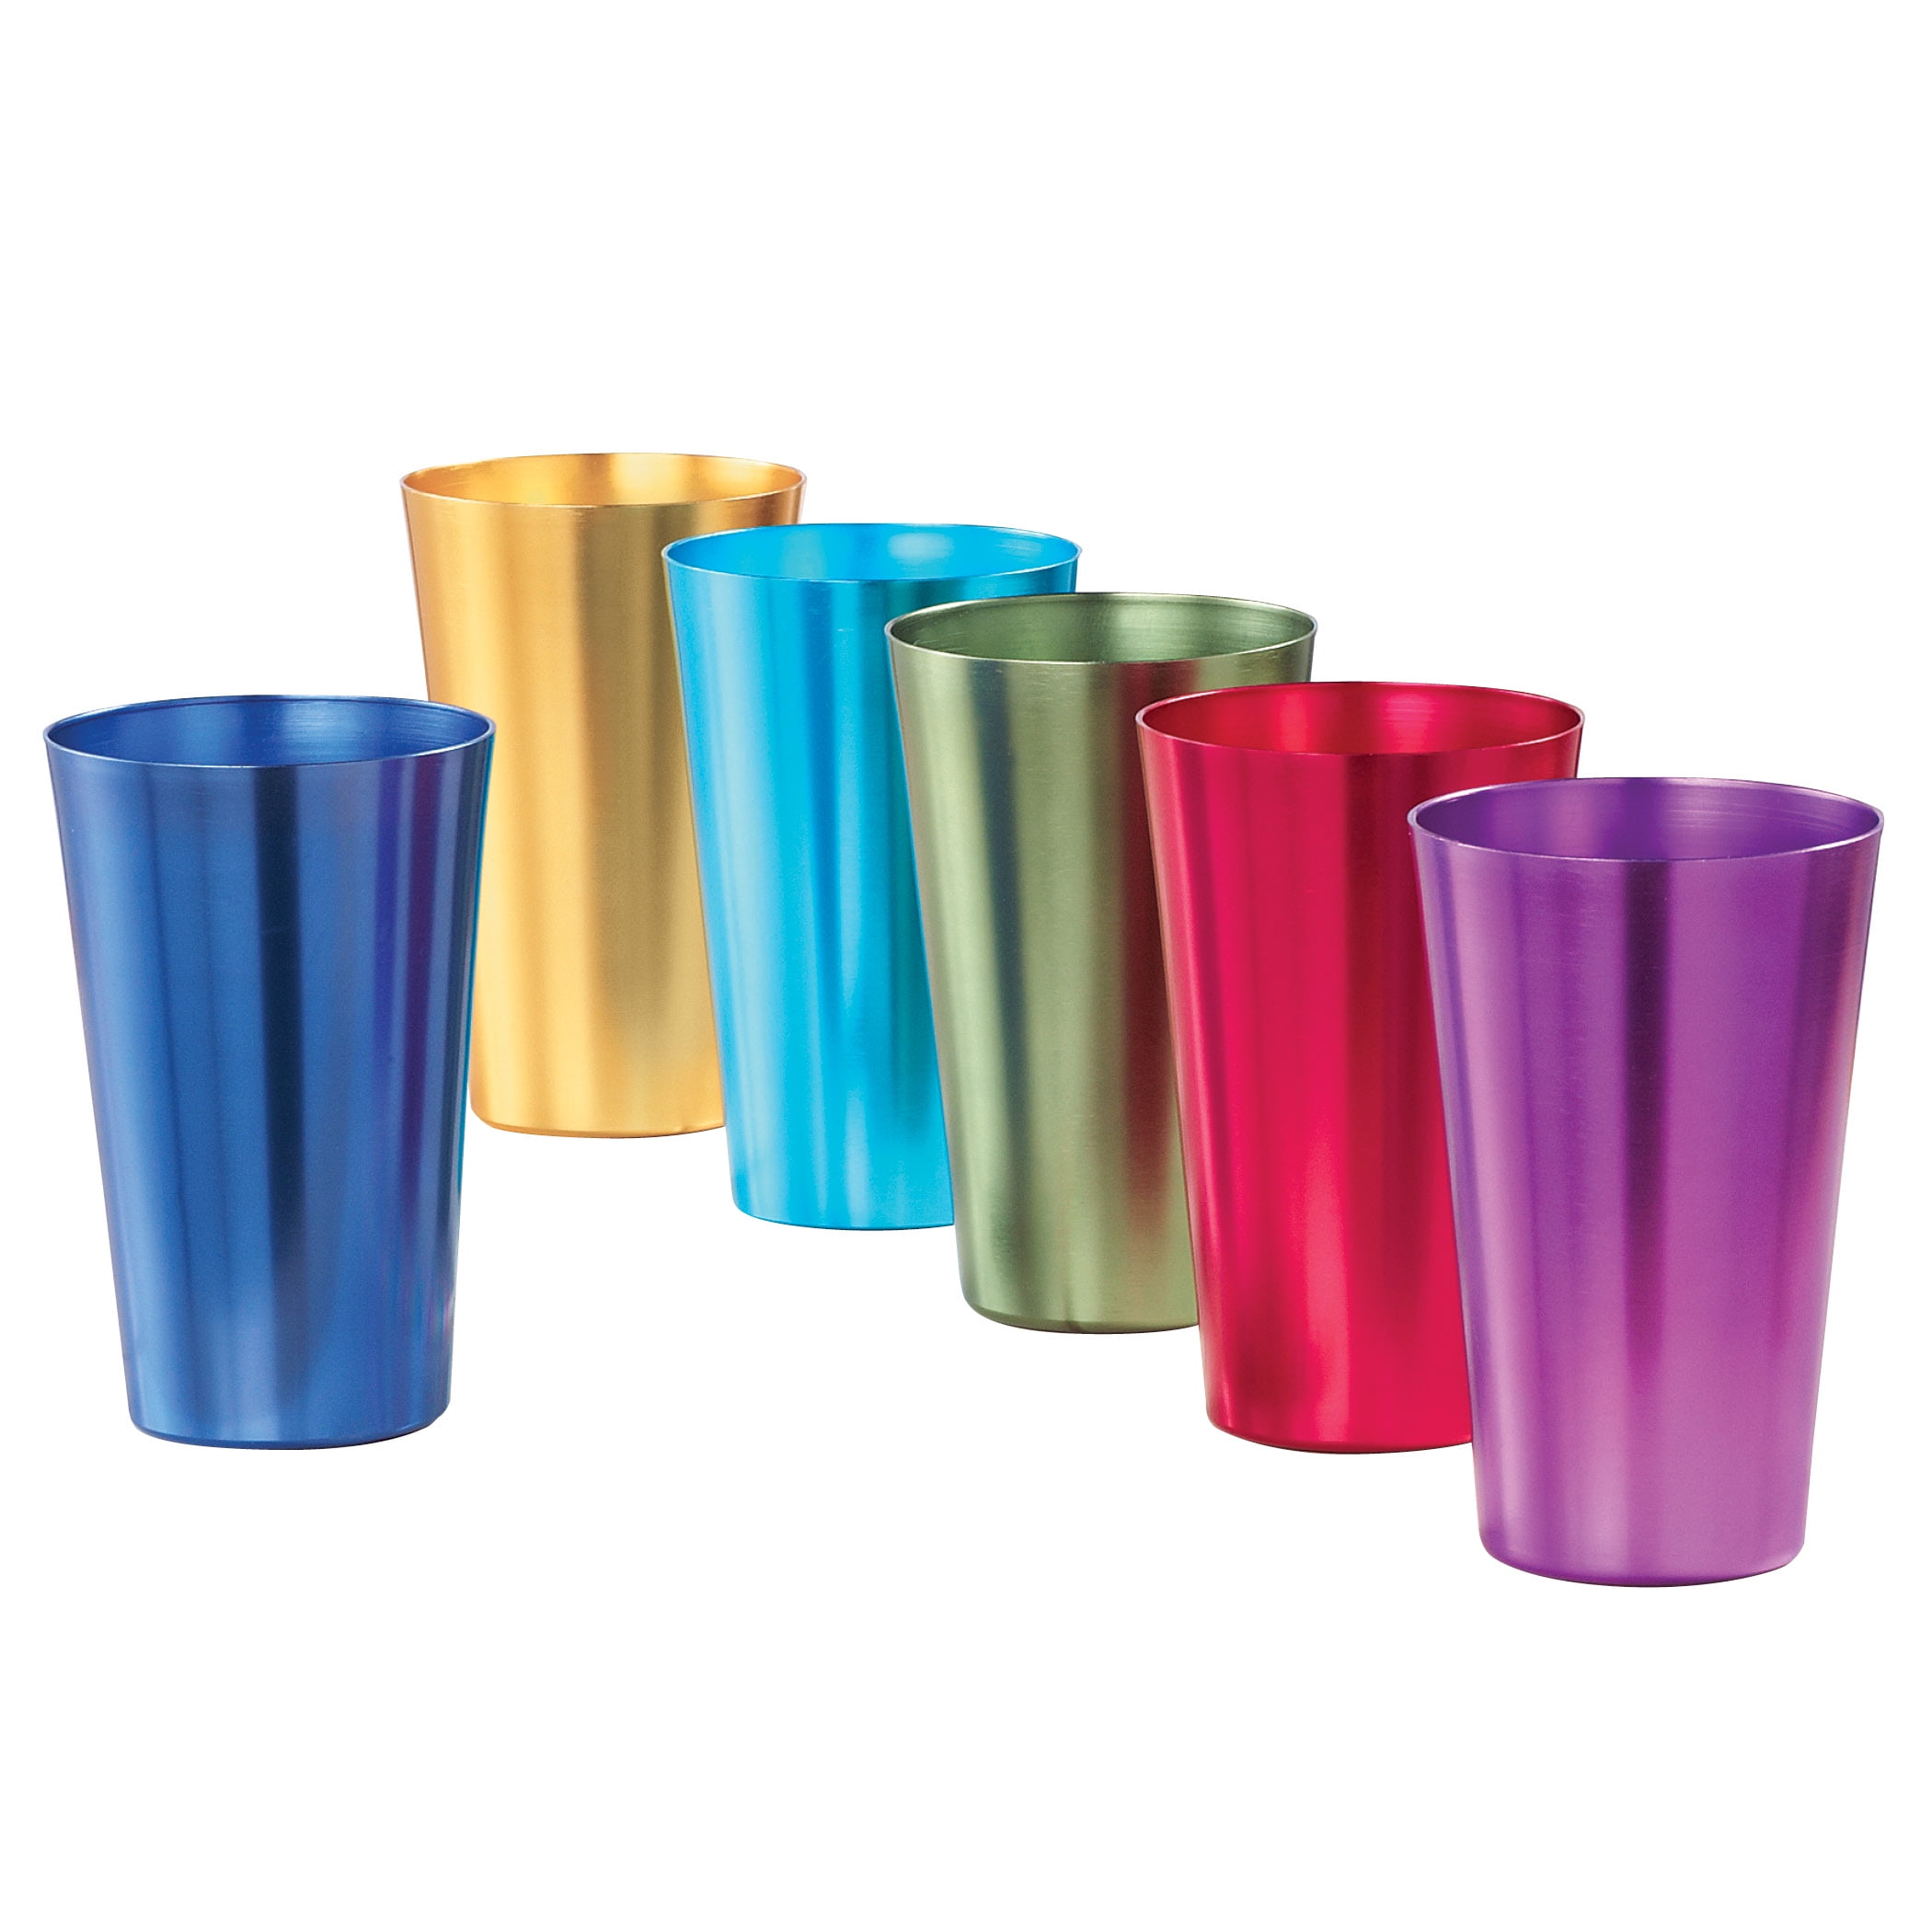 Collections Etc Colorful Retro Style Aluminum Rainbow Tumblers - Set of 6 -  Great for Parties or Everyday Use - Vibrant Jewel Tones - Holds 12 oz. -  3.25 Dia x 5.25H 